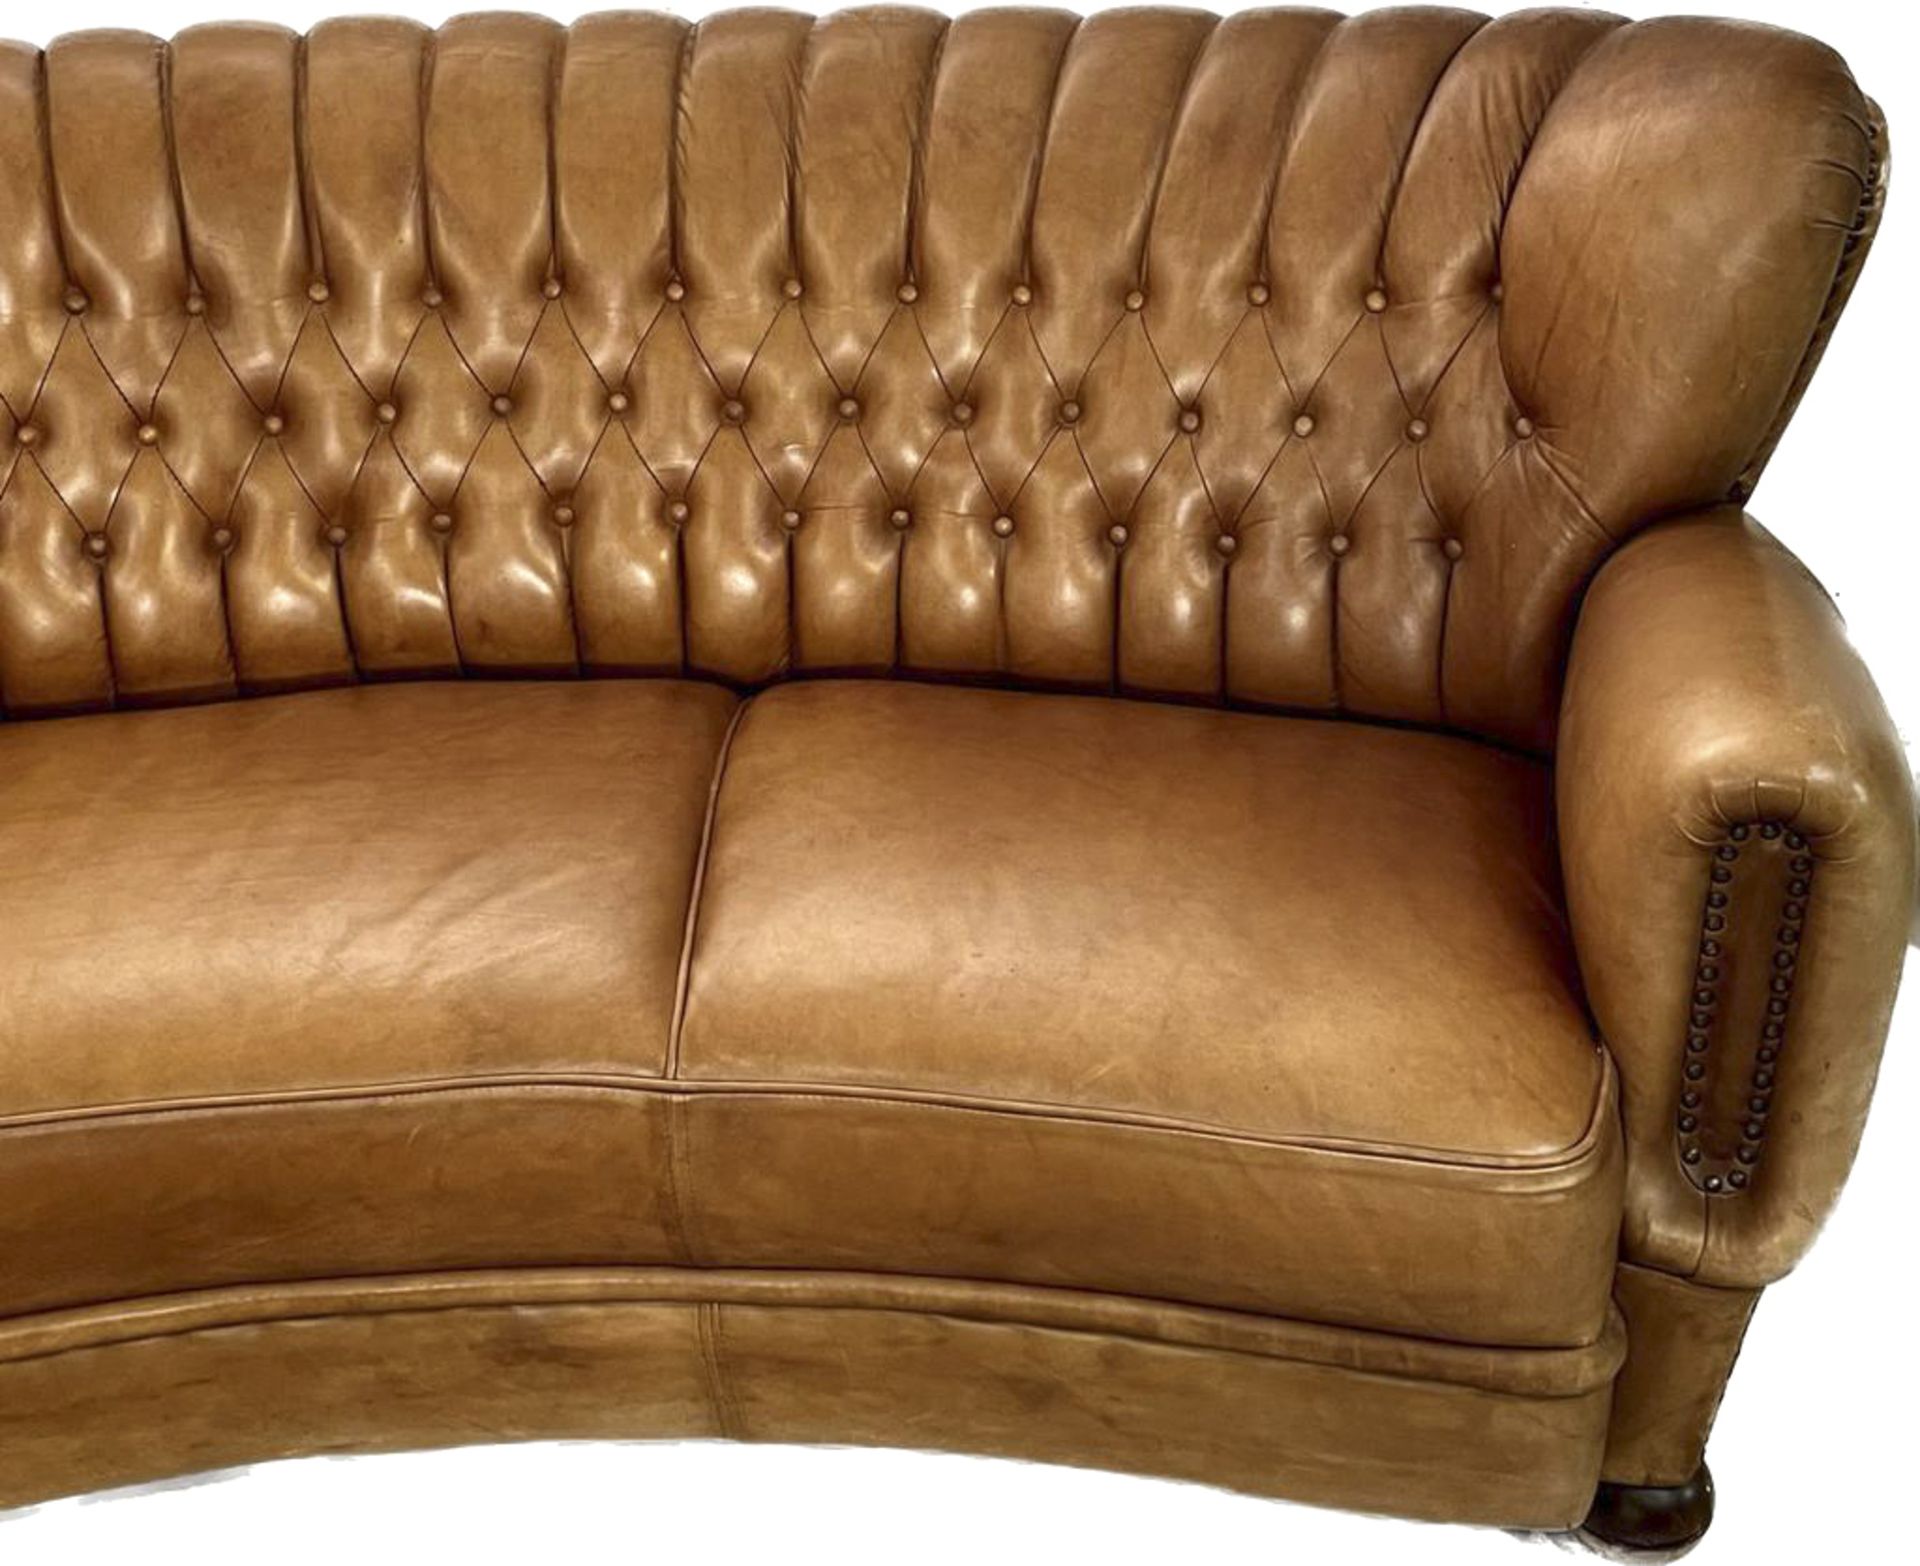 Sofa around 1920/30, leather upholstery, 80 x 230 x 80 cm - The furniture cannot be viewed in our - Image 2 of 3